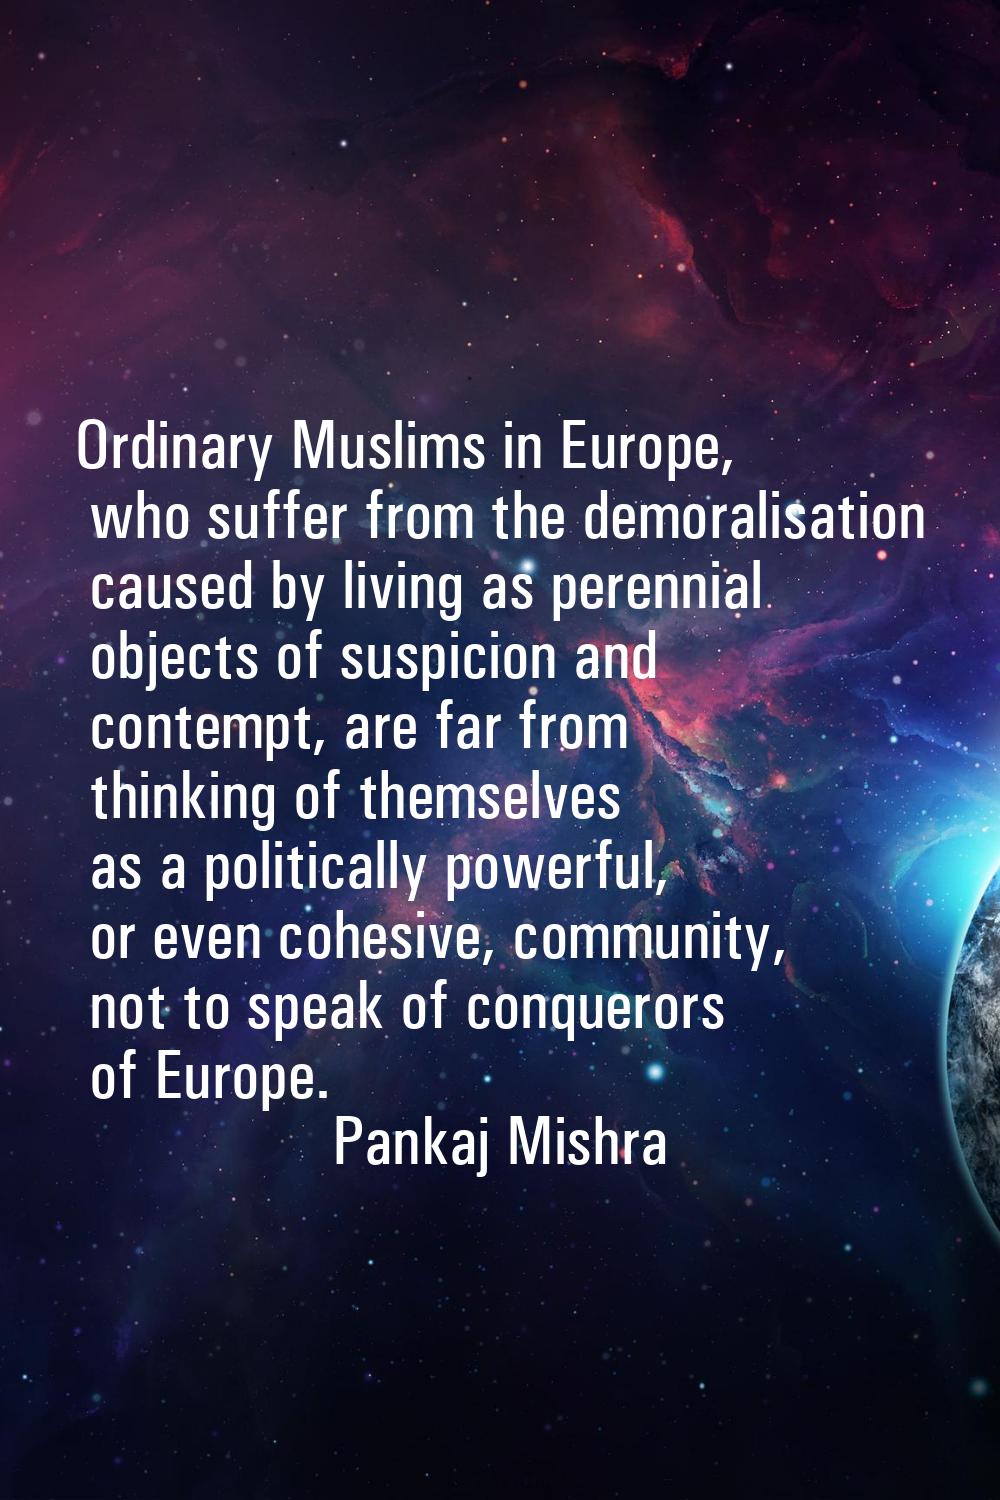 Ordinary Muslims in Europe, who suffer from the demoralisation caused by living as perennial object